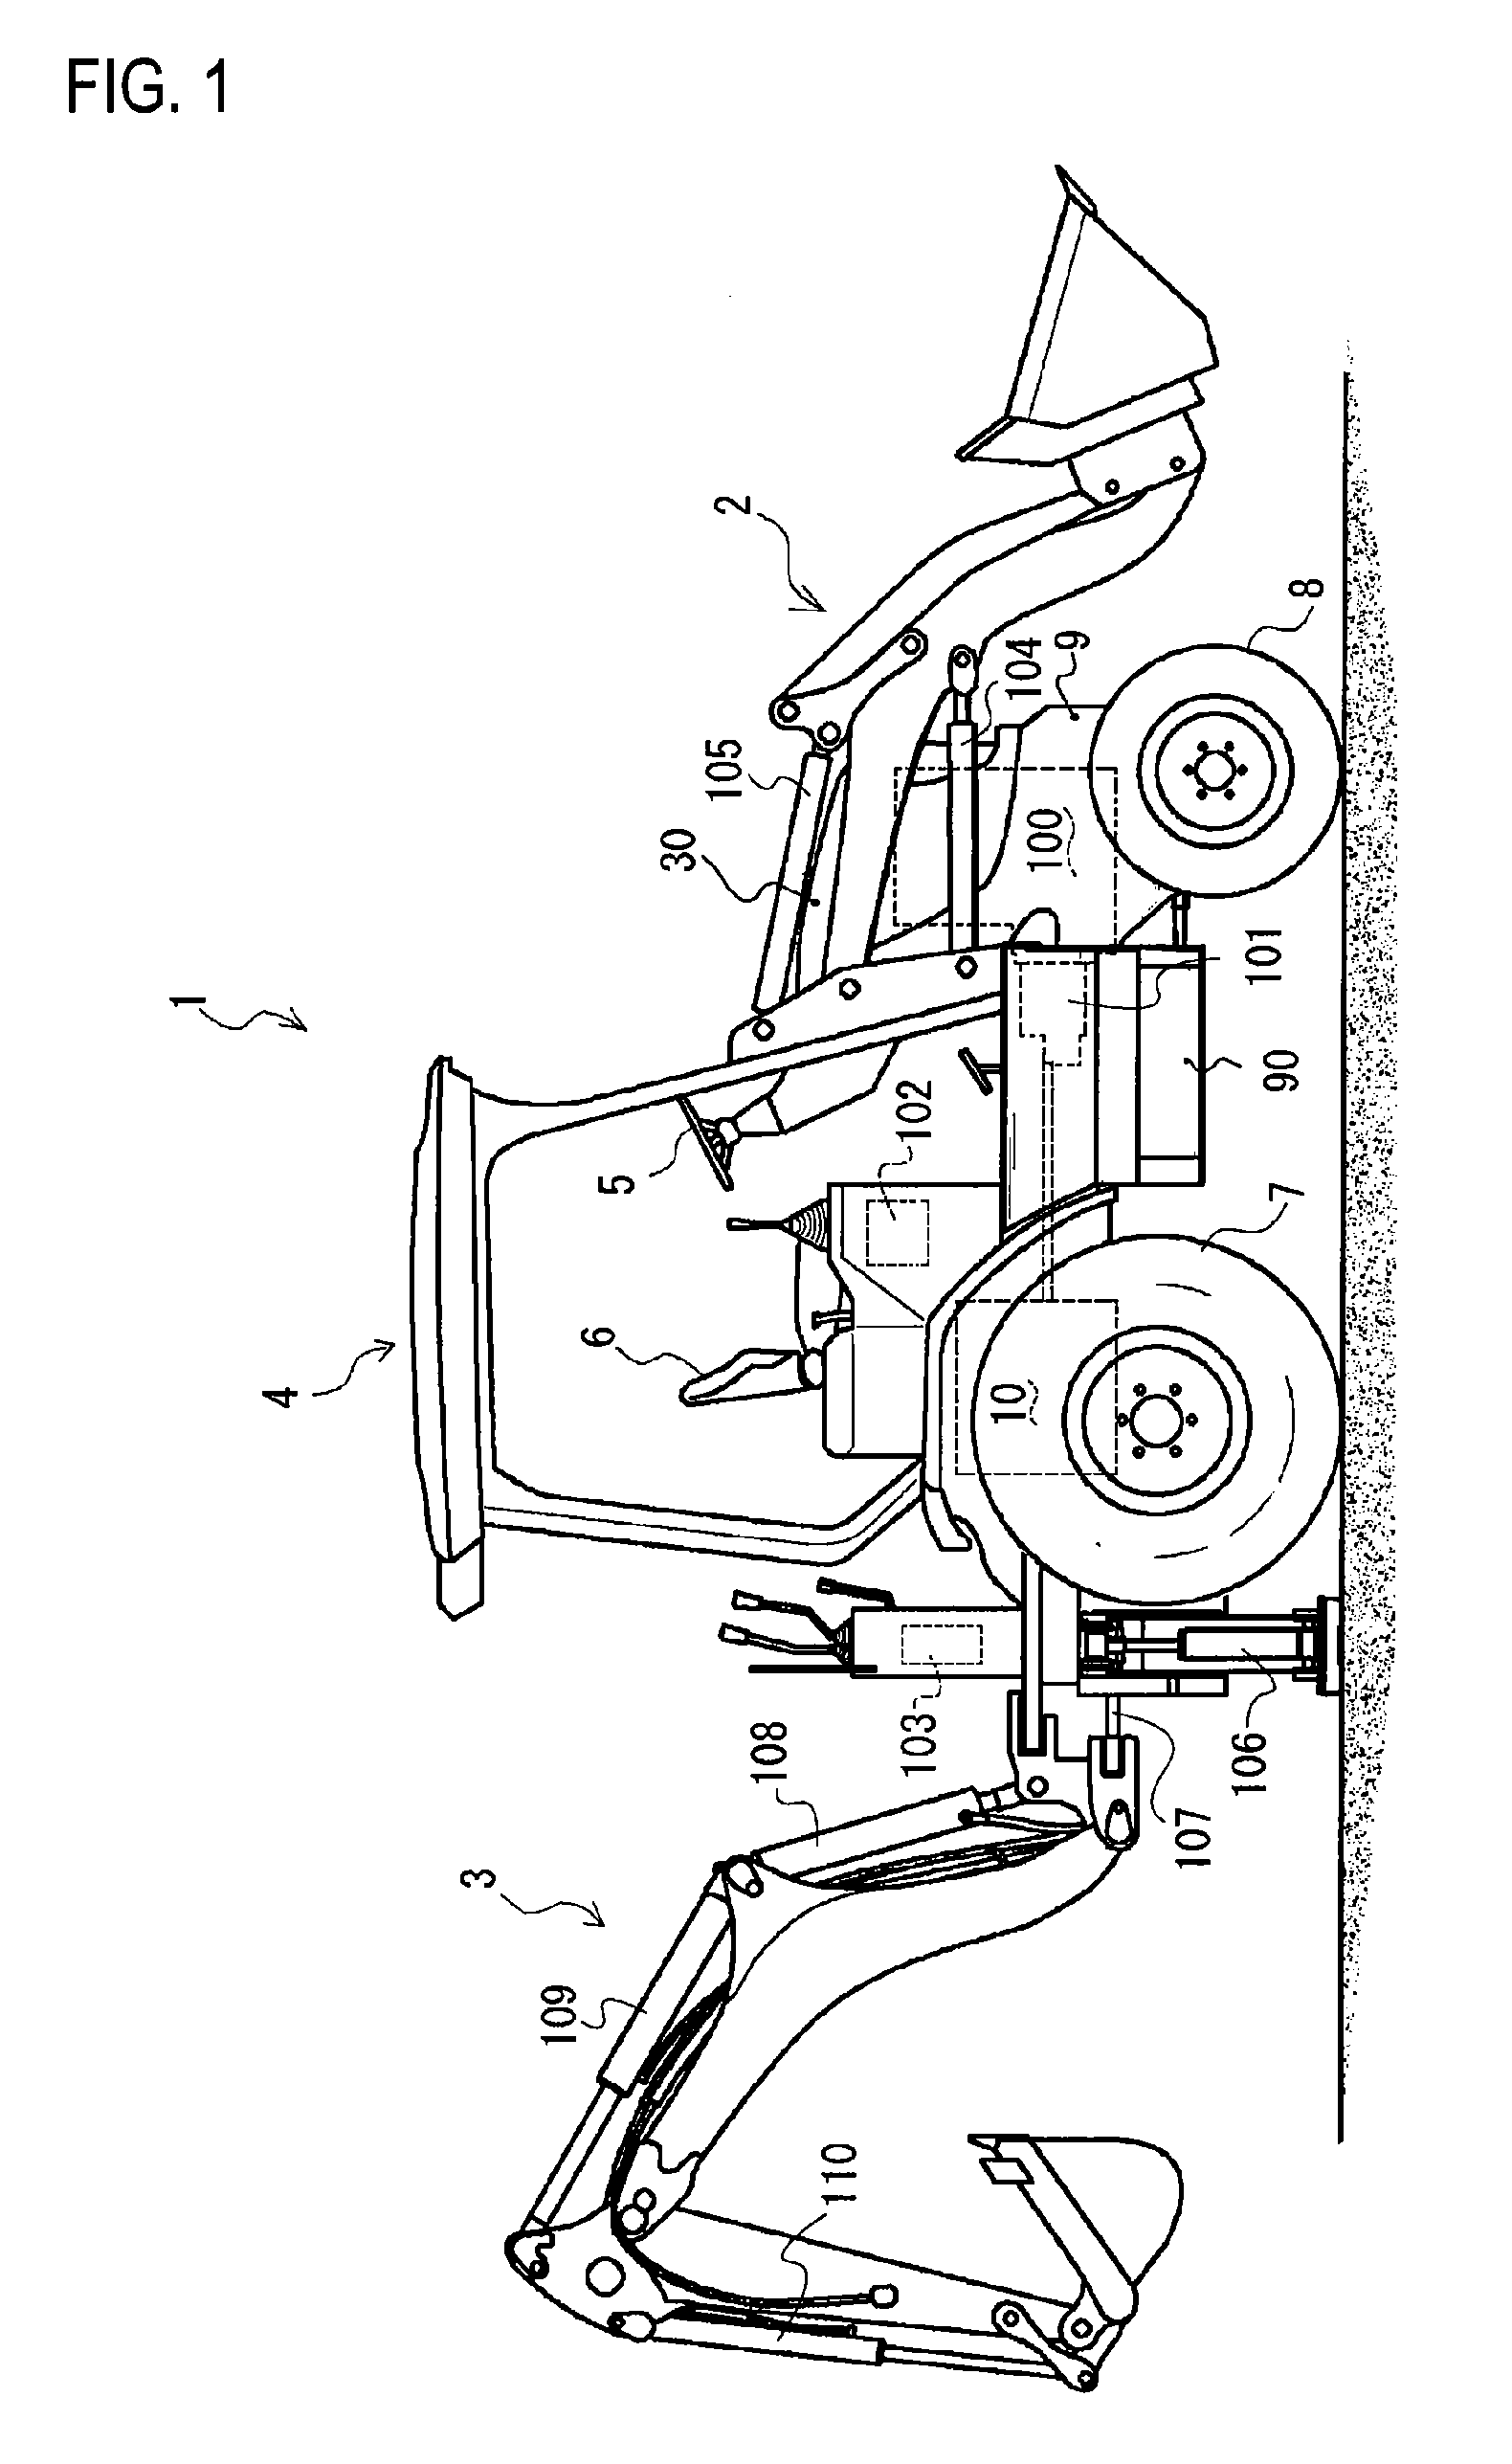 Hydraulic Circuit Structure of Work Vehicle